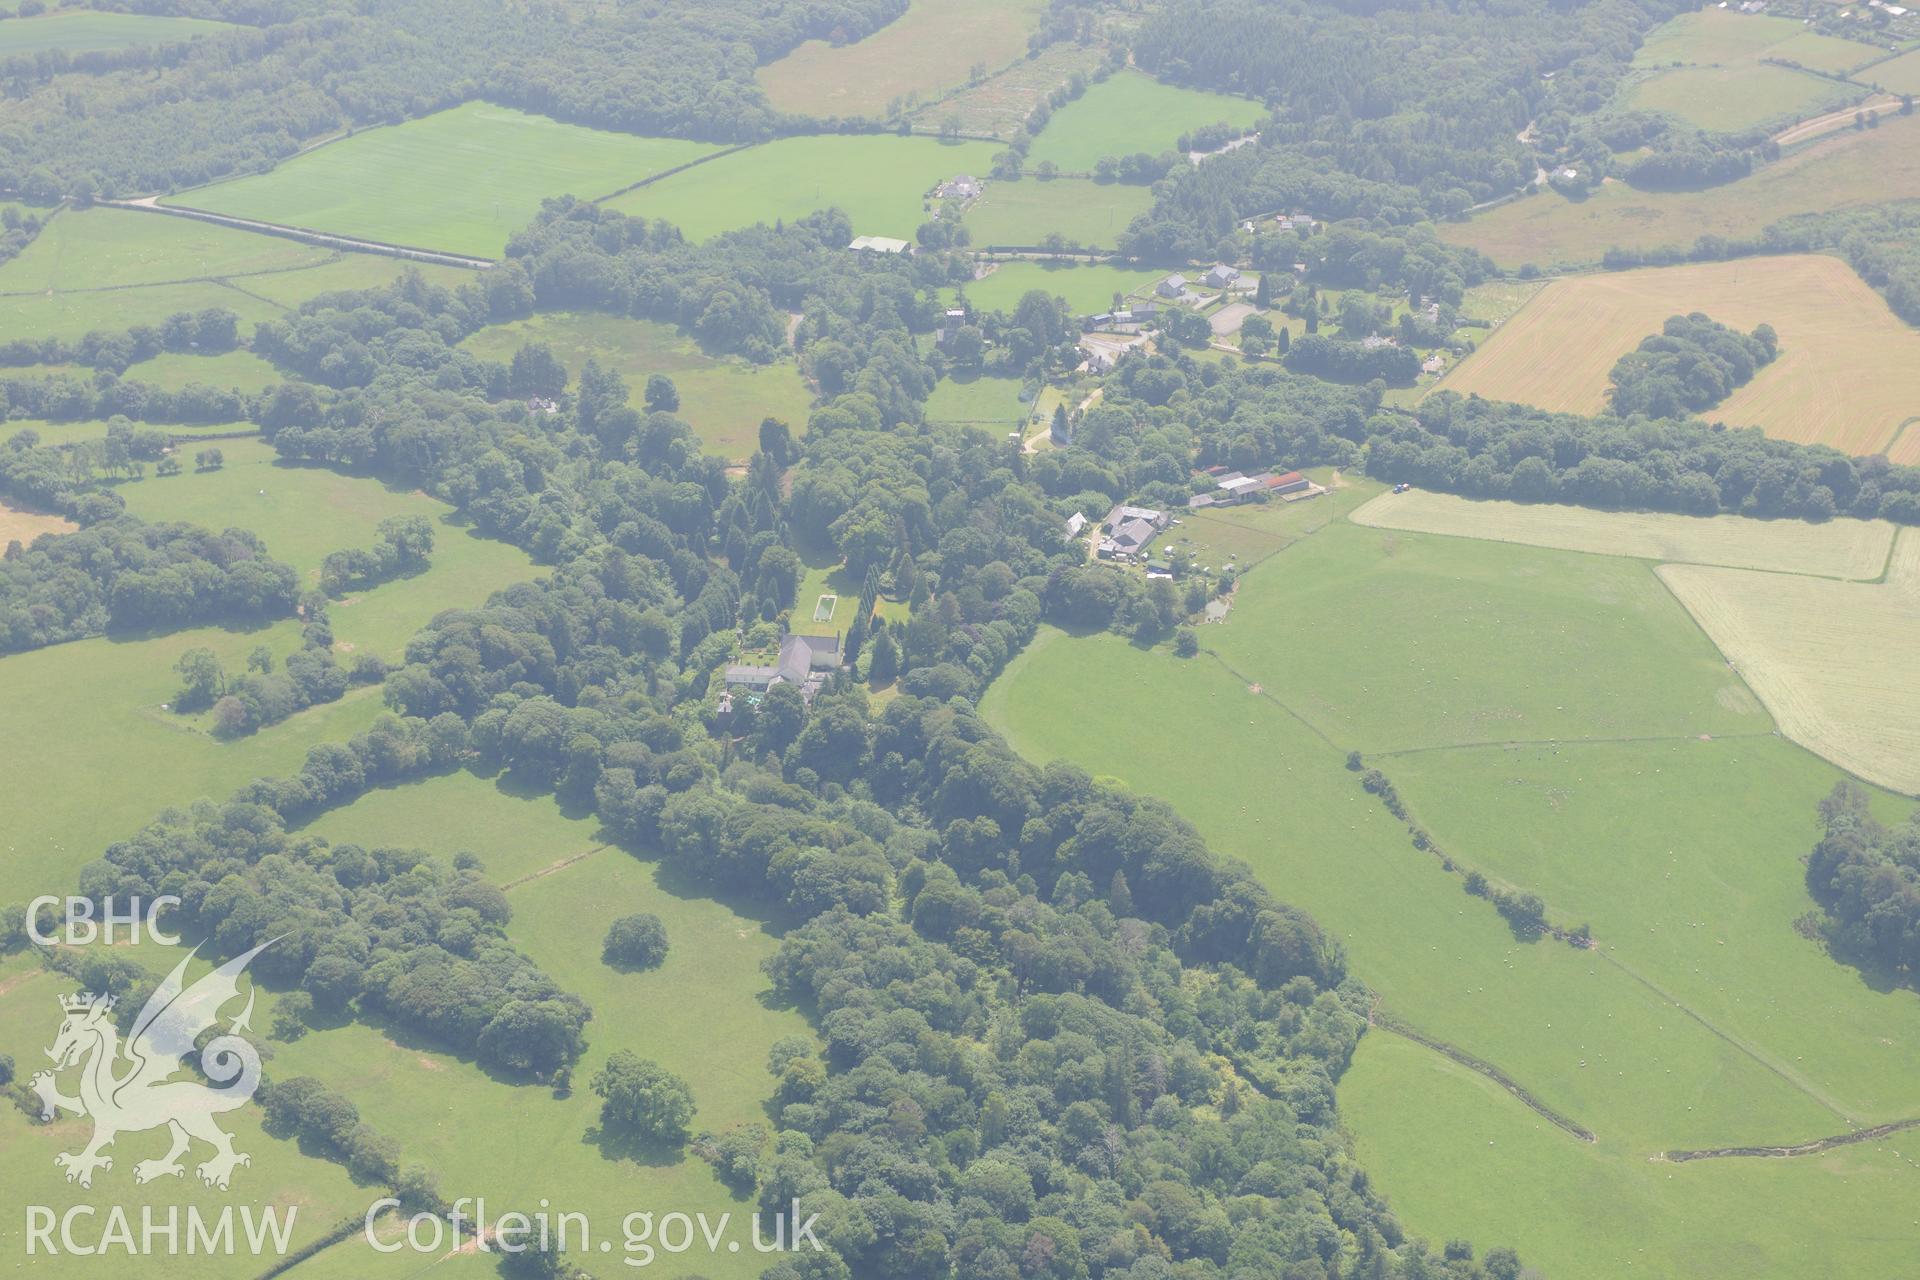 Bodfean Hall and its associated grounds and gardens, north west of Pwllheli, on the Lleyn Peninsula. Oblique aerial photograph taken during the Royal Commission?s programme of archaeological aerial reconnaissance by Toby Driver on 12th July 2013.